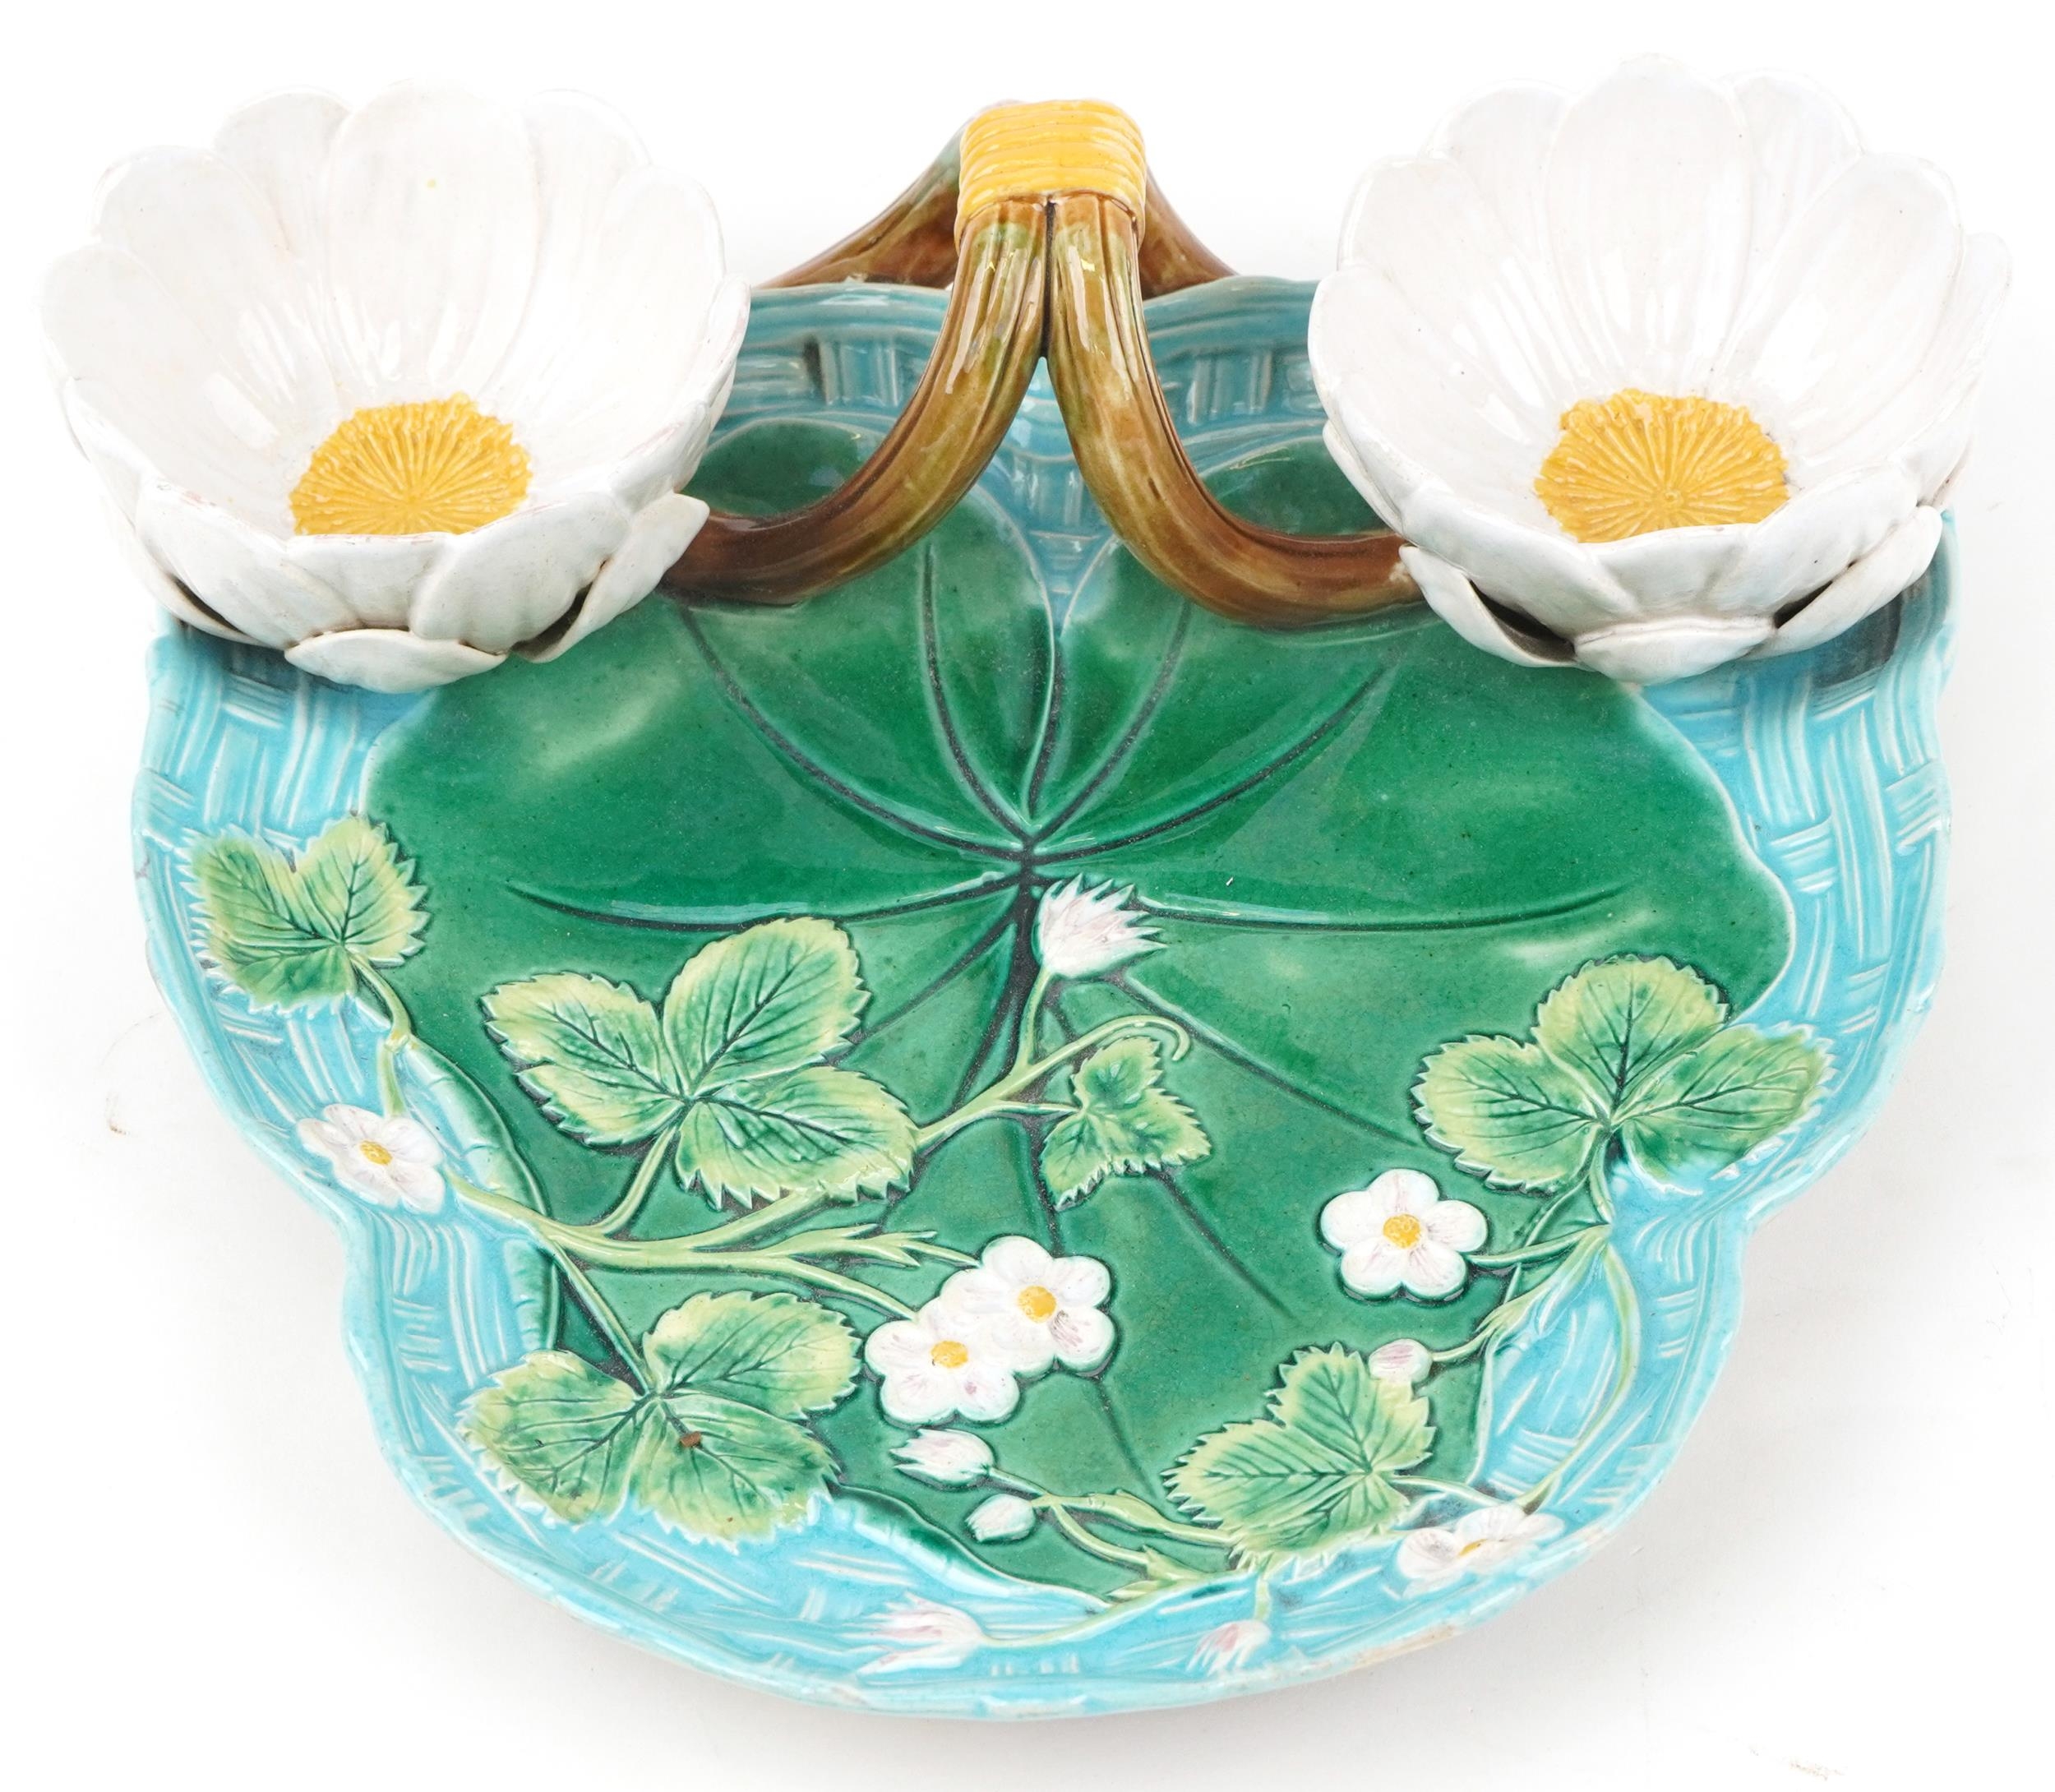 George Jones, Victorian Majolica strawberry server in the form of a lili pad with sugar and cream - Image 2 of 5